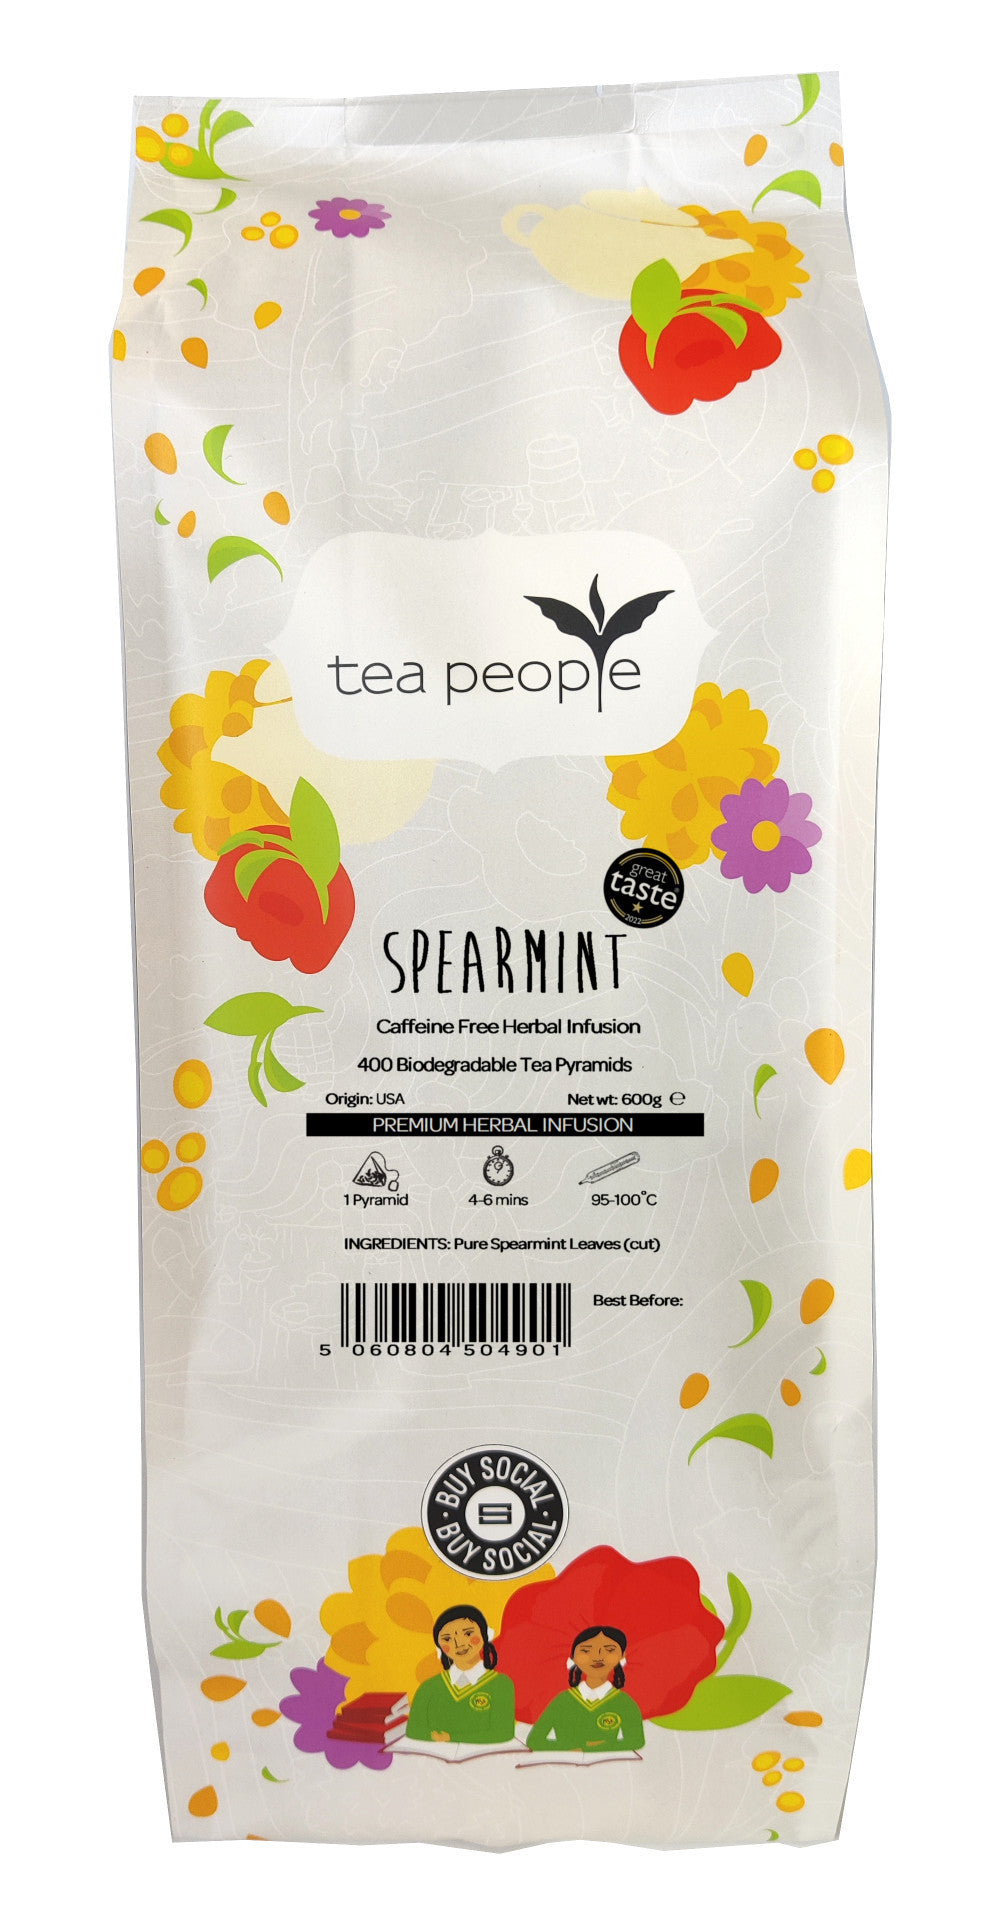 Spearmint - Herbal Tea Pyramids - 400 Pyramid Large Catering Pack